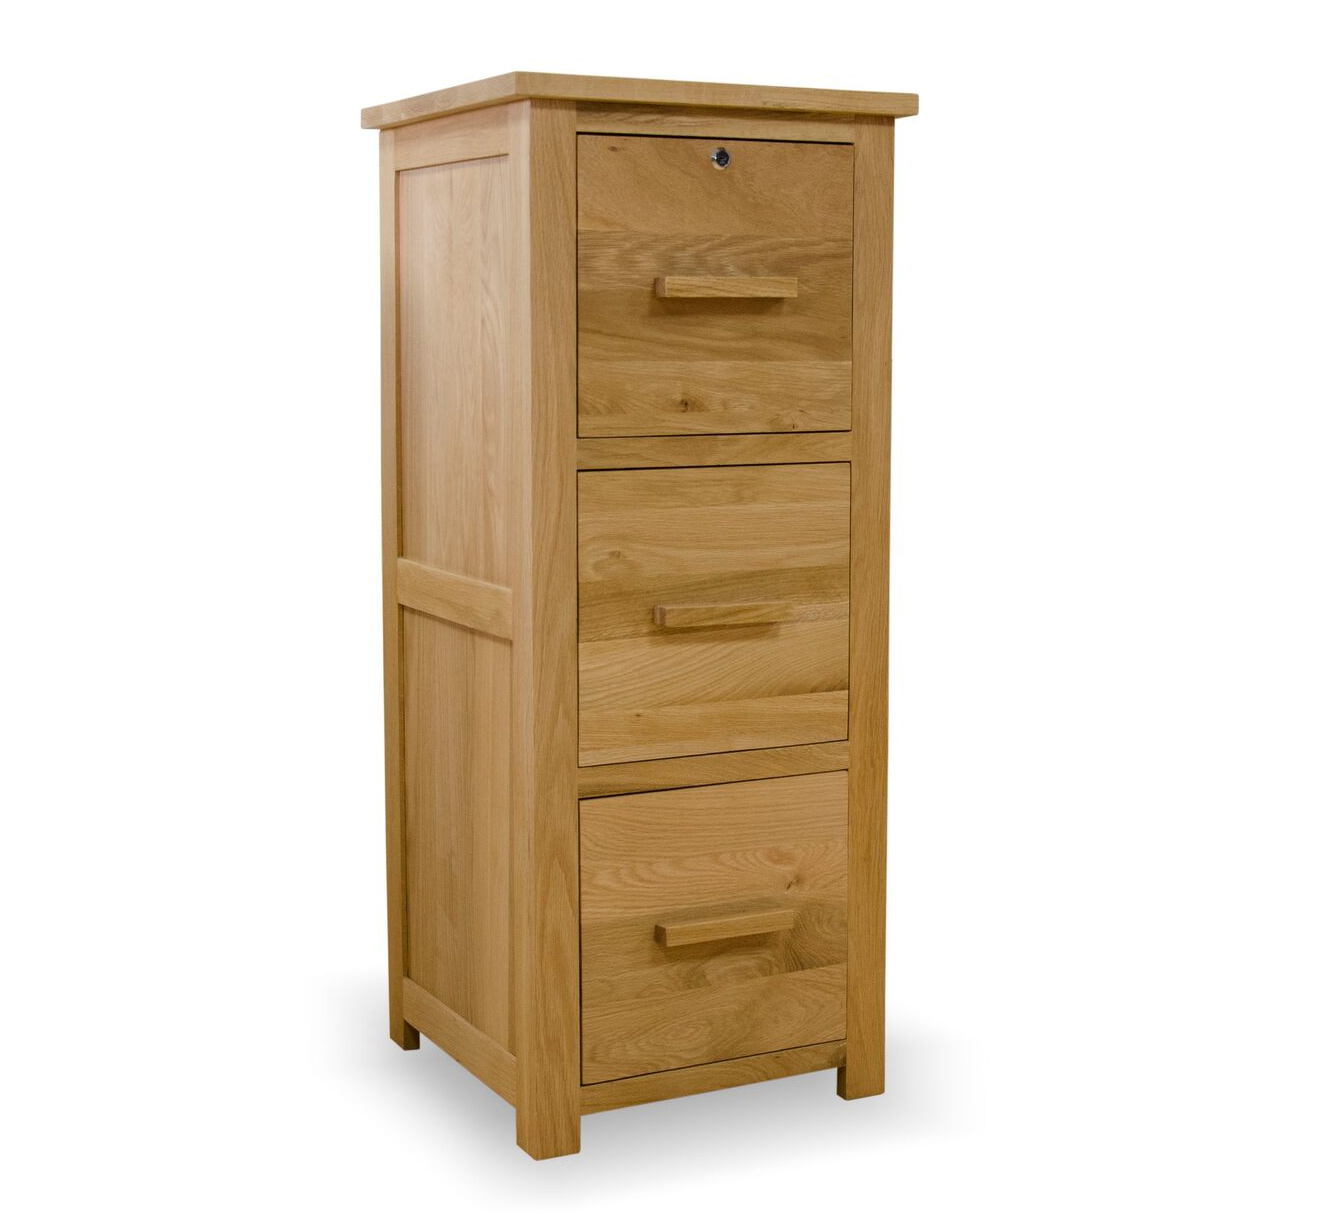 Homestyle Opus Light Oak 3 Drawer Filing Cabinet pertaining to sizing 1317 X 1224